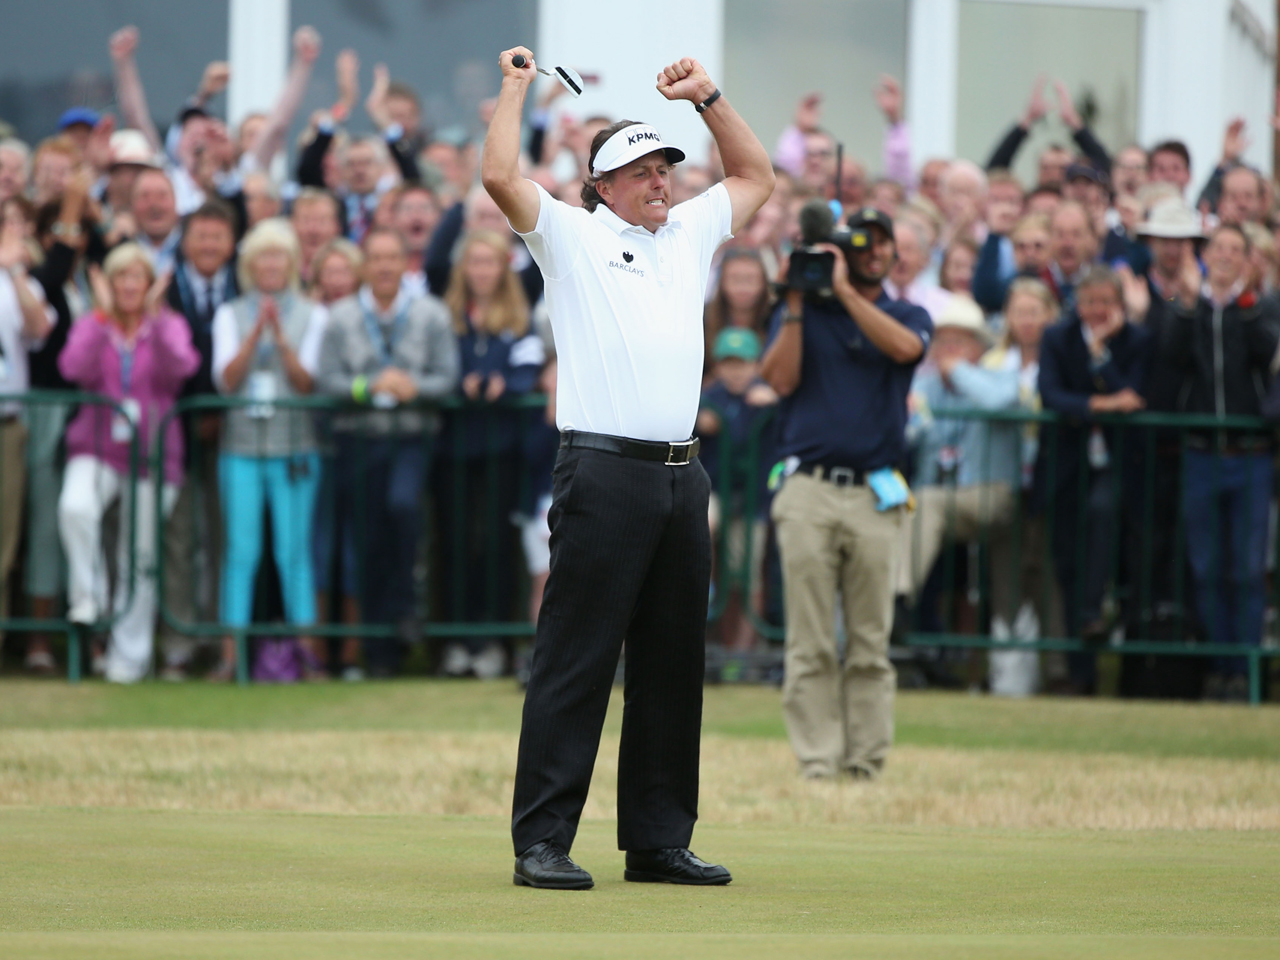 Phil Mickelson wins British Open with superb final round CBS News